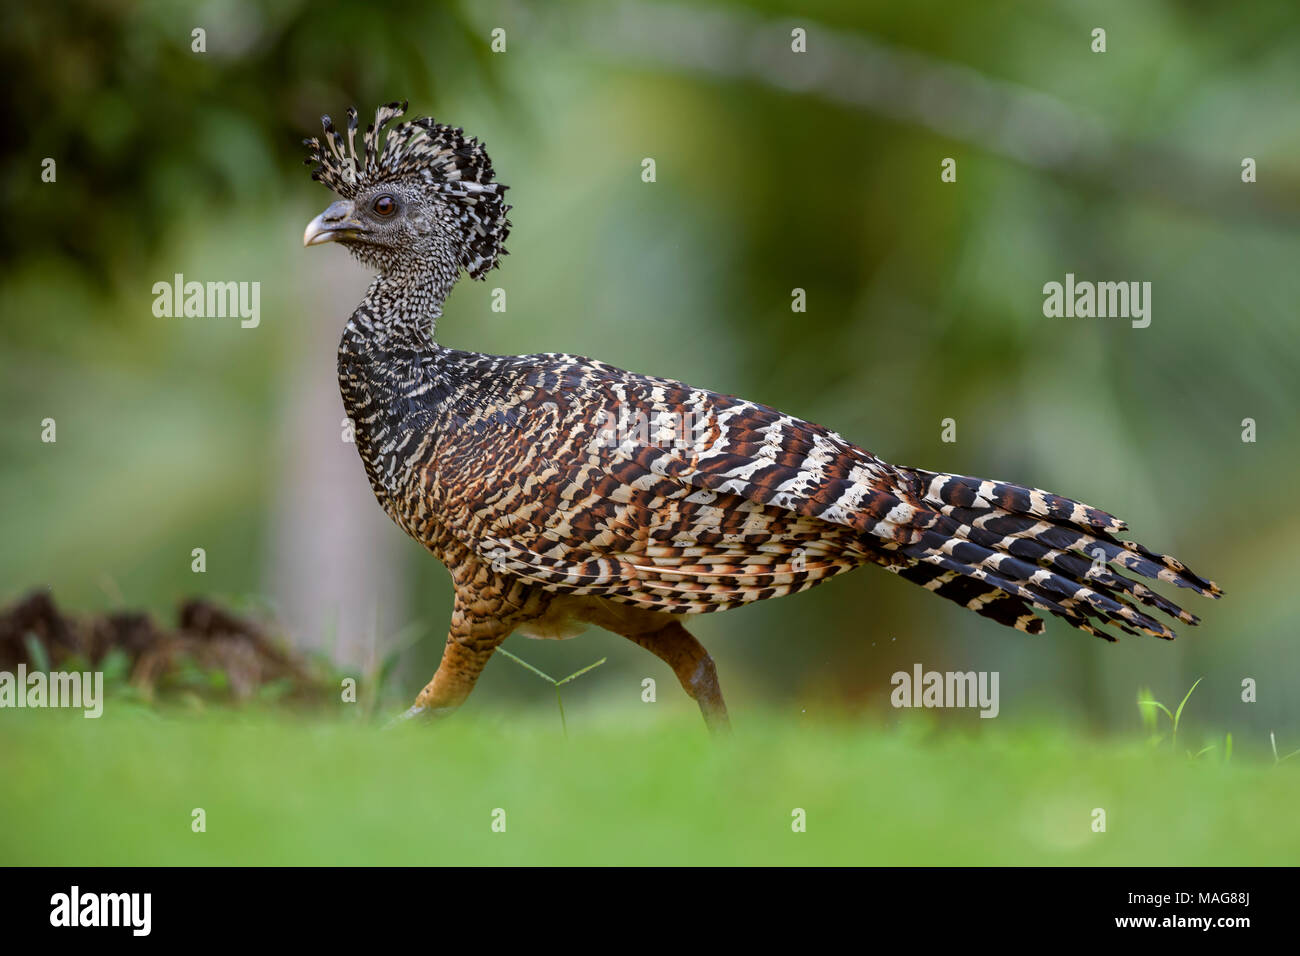 Great Curassow - Crax rubra, large pheasant-like bird from the Neotropical rainforests, Costa Rica. Stock Photo